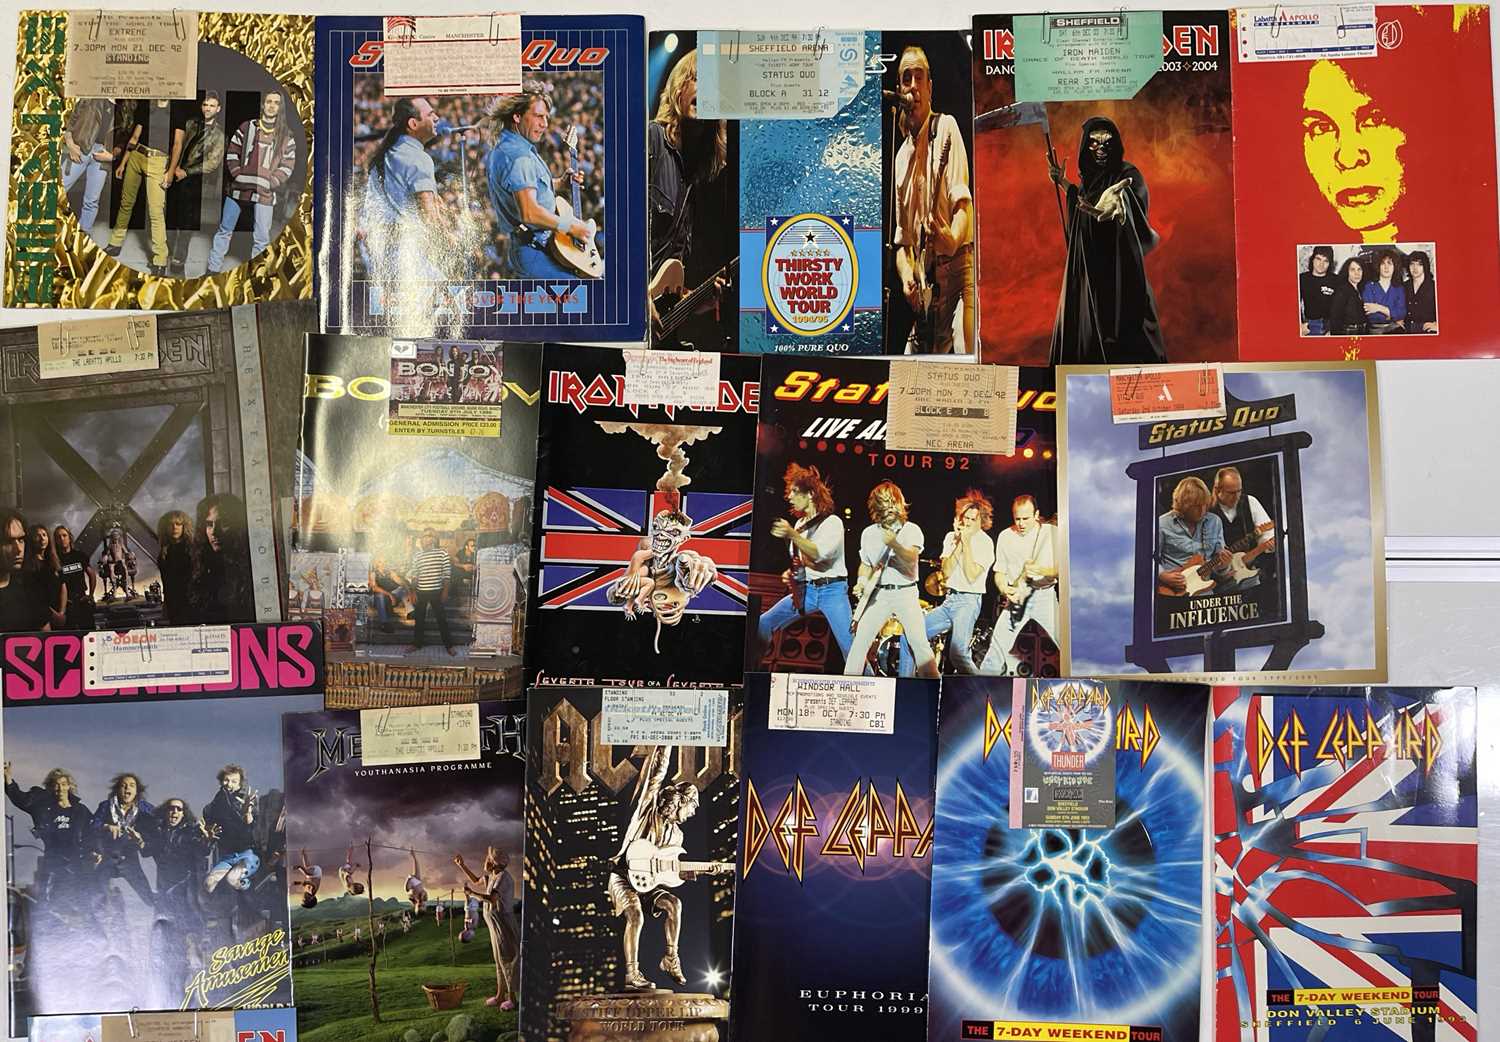 METAL / HARD ROCK CONCERT PROGRAMMES AND TICKET ARCHIVE - 1980S-00S. - Image 7 of 7